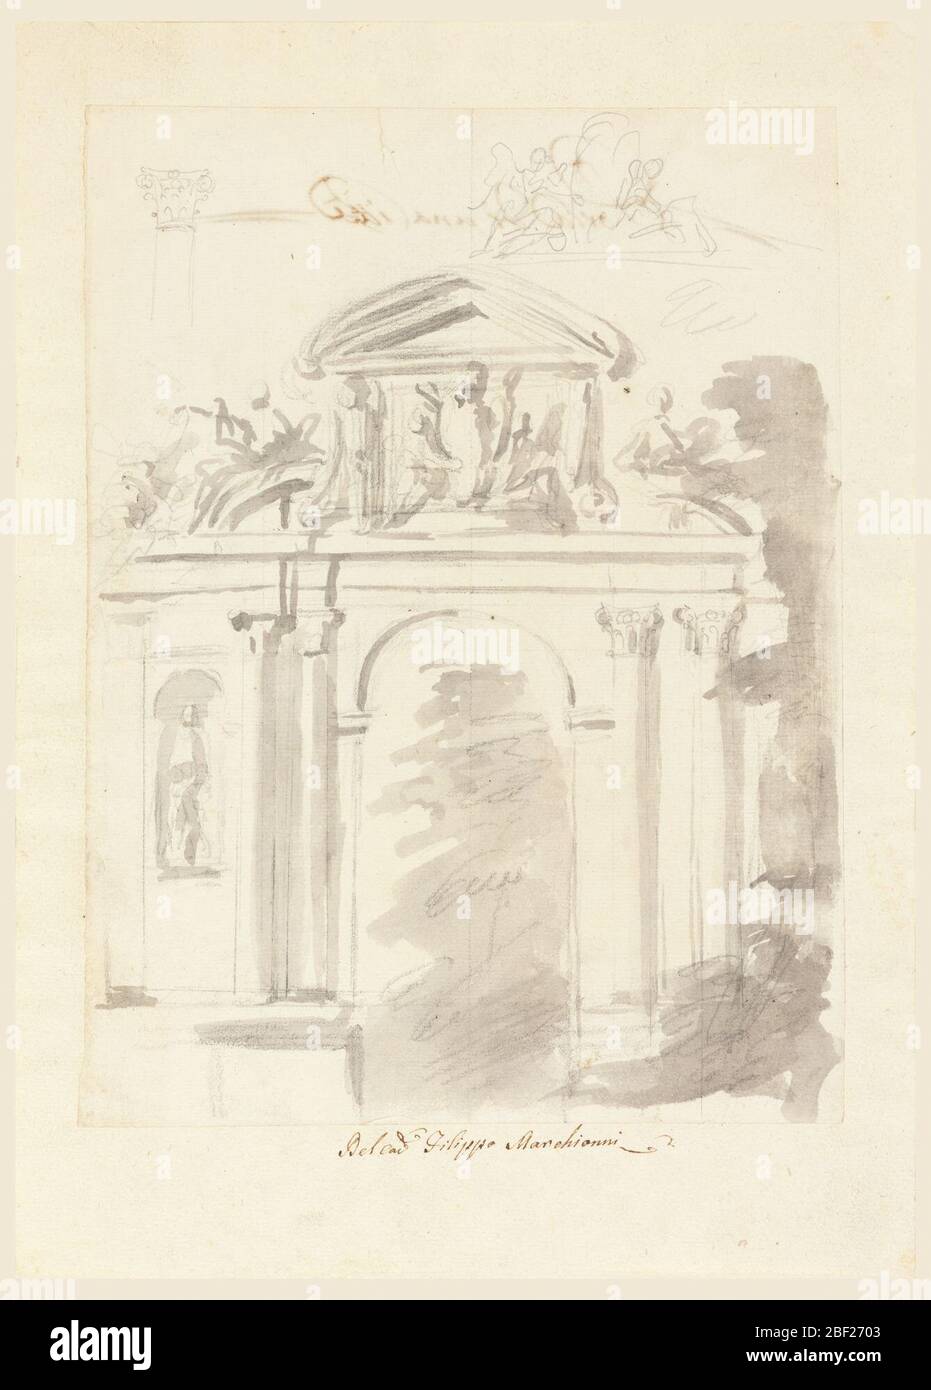 Frame for a town gate with alternate suggestions. Architectural detail of archway, two superficial Corinthian columns at left and right of open arch. Statue in recessed archway at left, facade of Greek temple above. Stock Photo